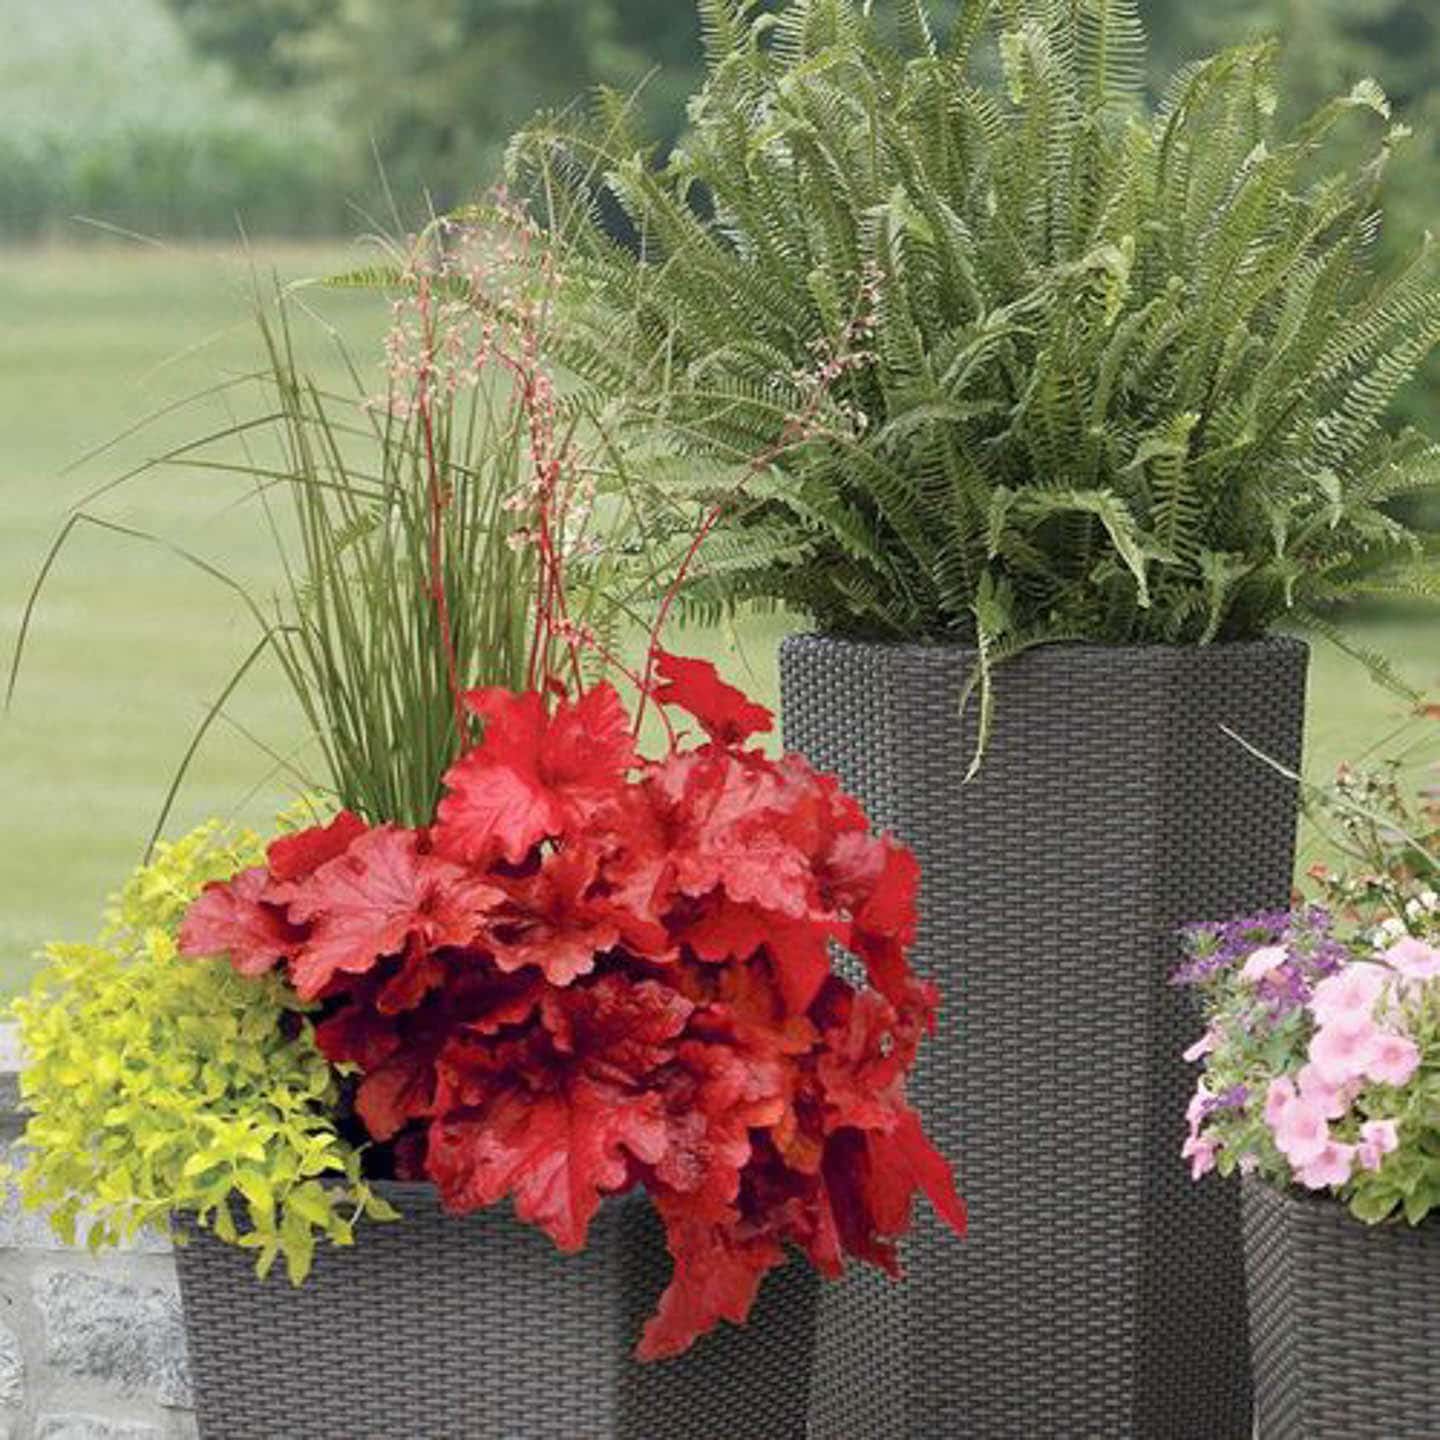 Forever® Red Coral Bells in a container with grasses and ferns